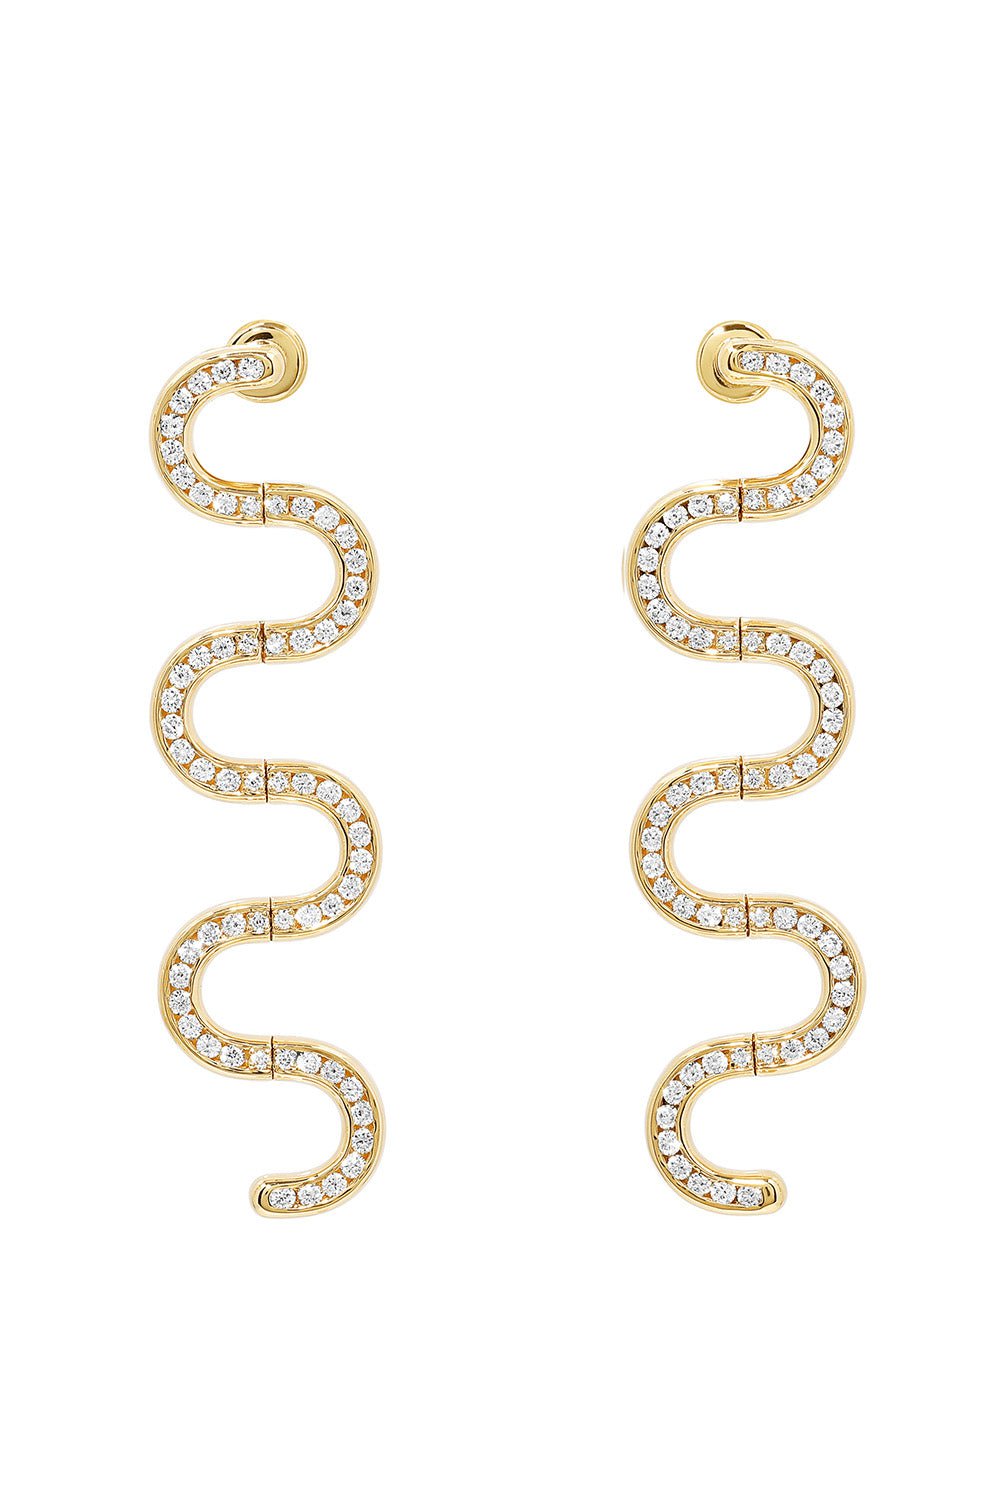 STATE PROPERTY-Edessa Pavé Earrings-YELLOW GOLD